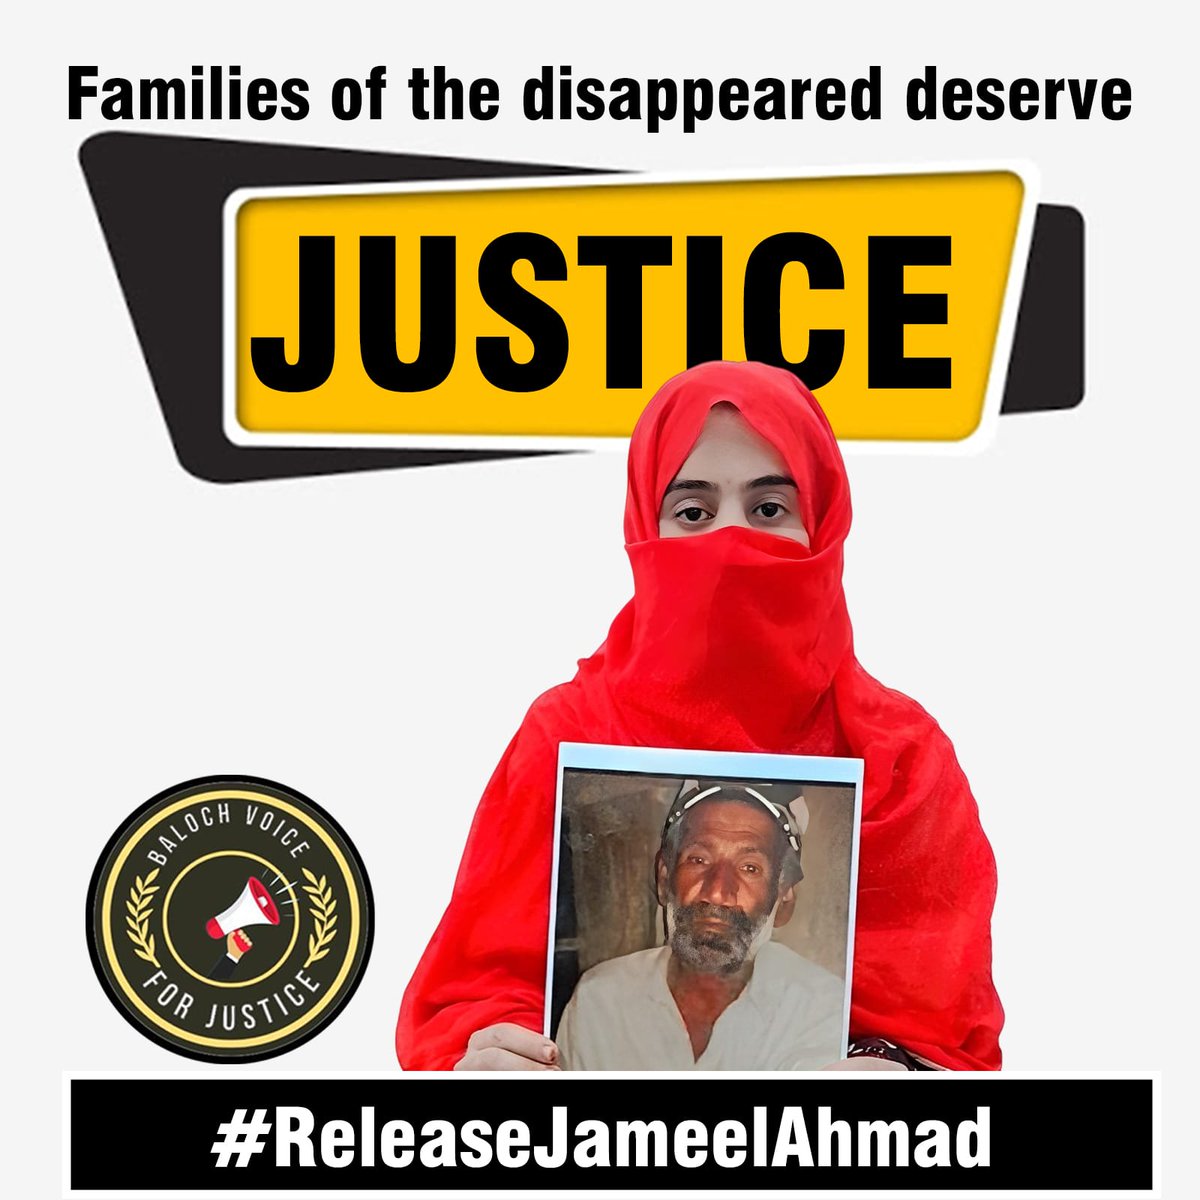 Thousands of Baloch people remain missing after being forcibly disappeared by Pakistani security forces. Baloch families deserve answers. #BalochMissingPersons #EndEnforcedDisappearances  
#ReleaseJameelAhmad